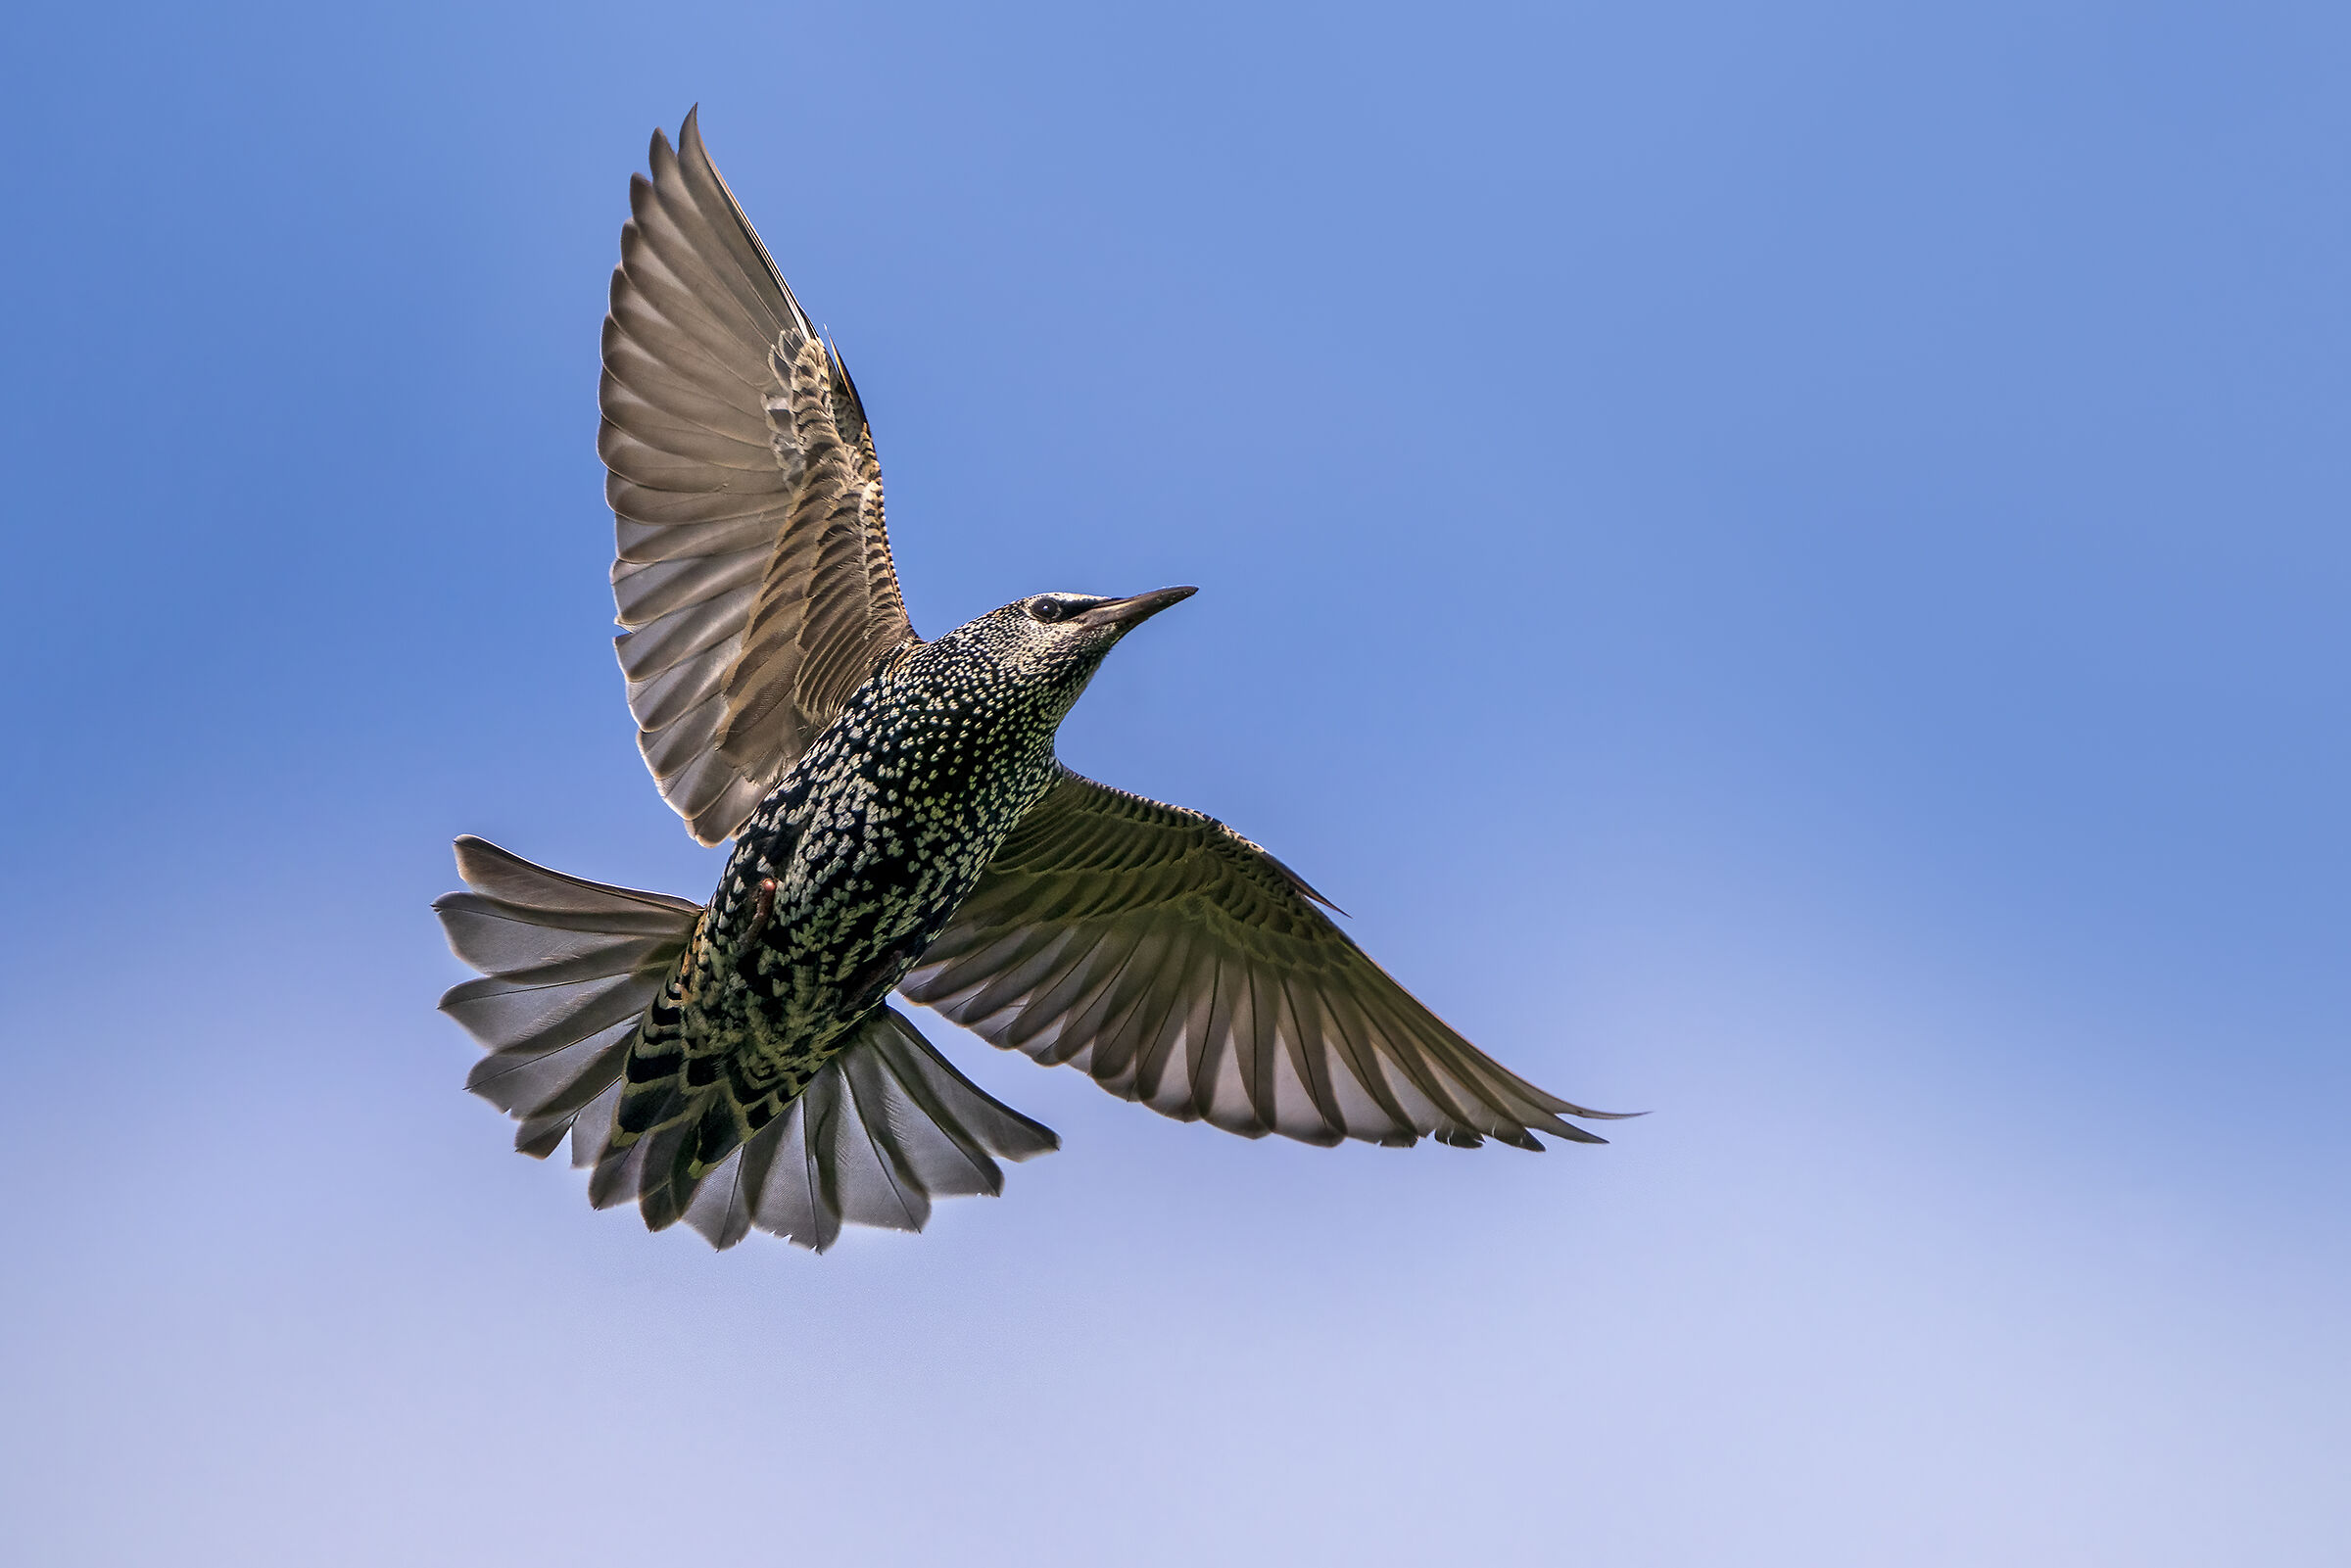 Starling in search of flying ants...